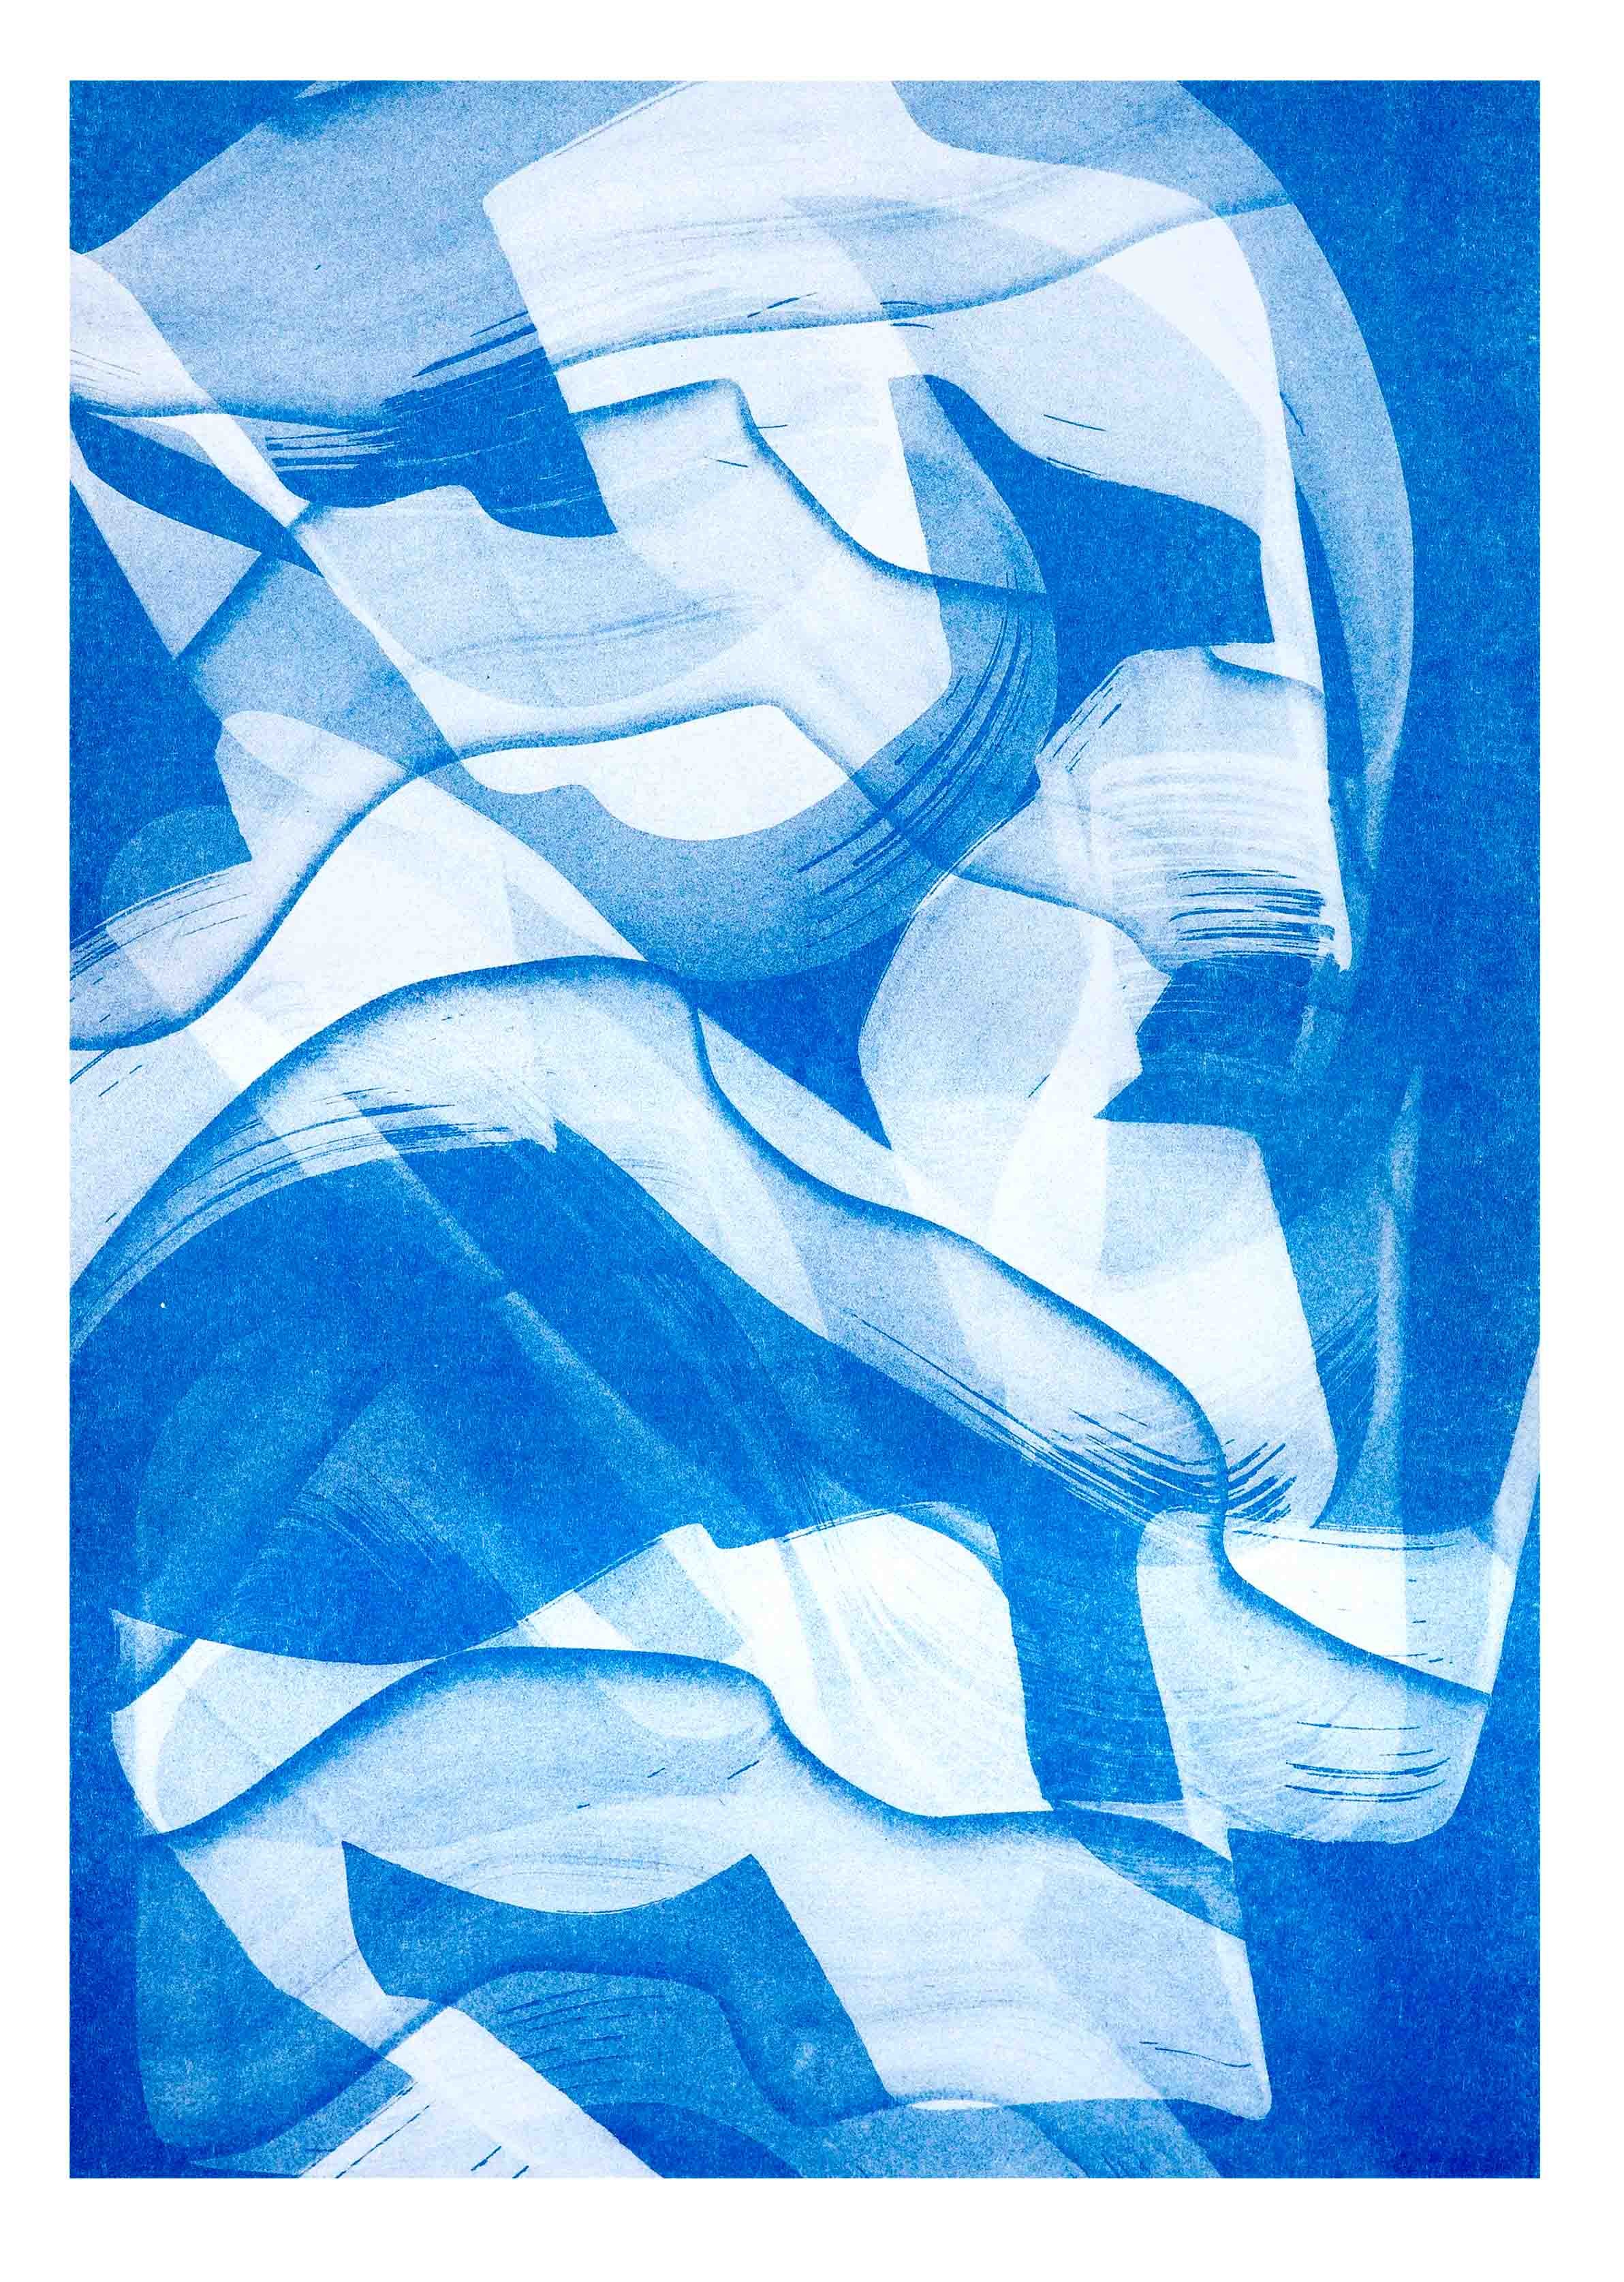  Untitled, 2023 risograph print on paper 42,0 x 29,7 cm (10-23) 